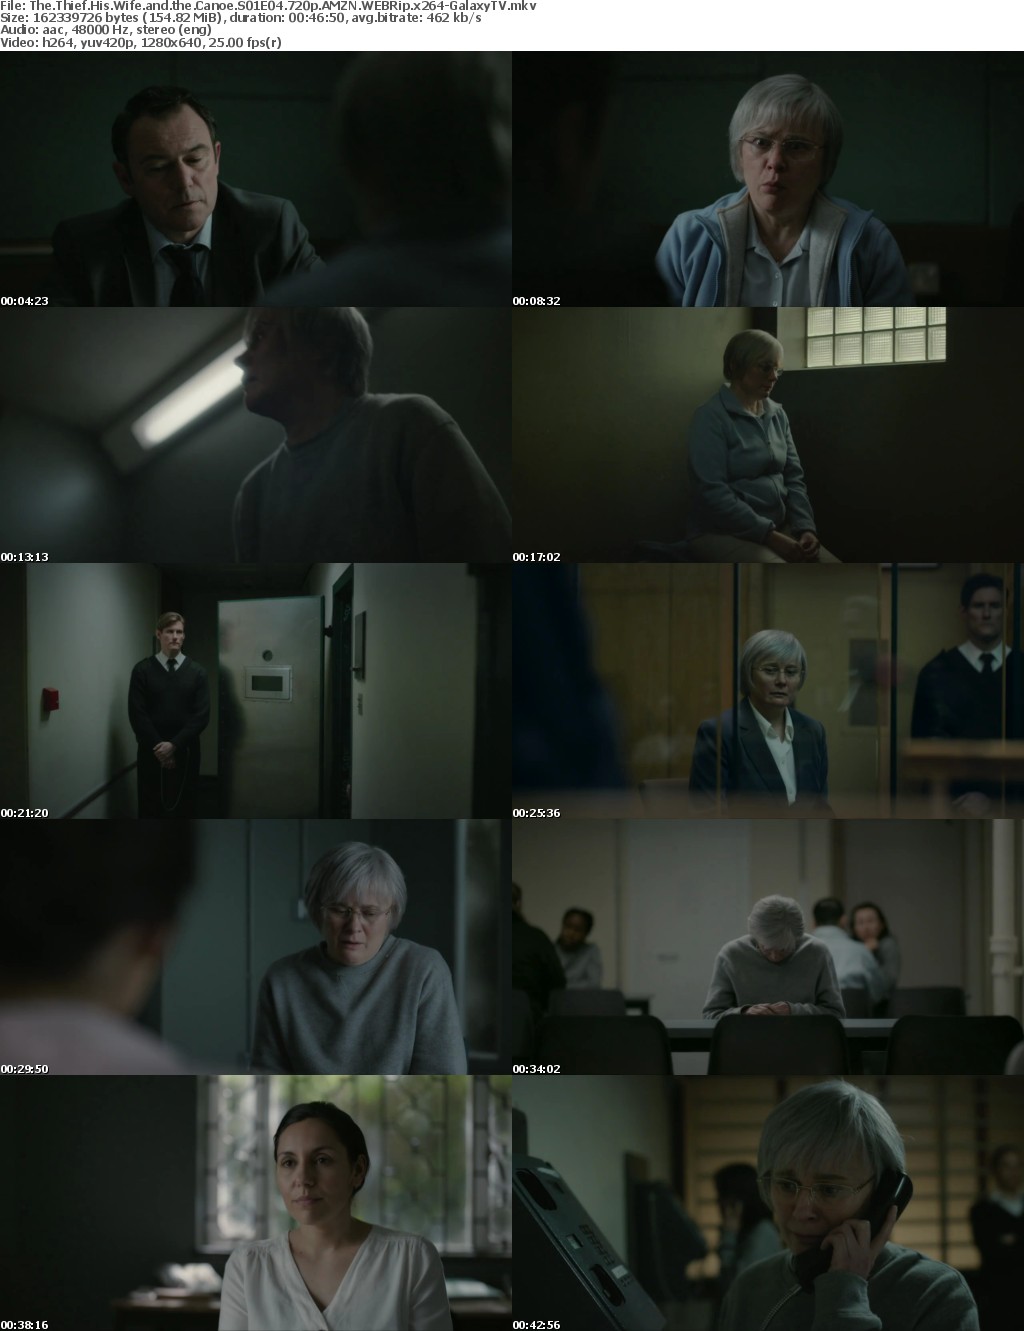 The Thief His Wife and the Canoe S01 COMPLETE 720p AMZN WEBRip x264-GalaxyTV